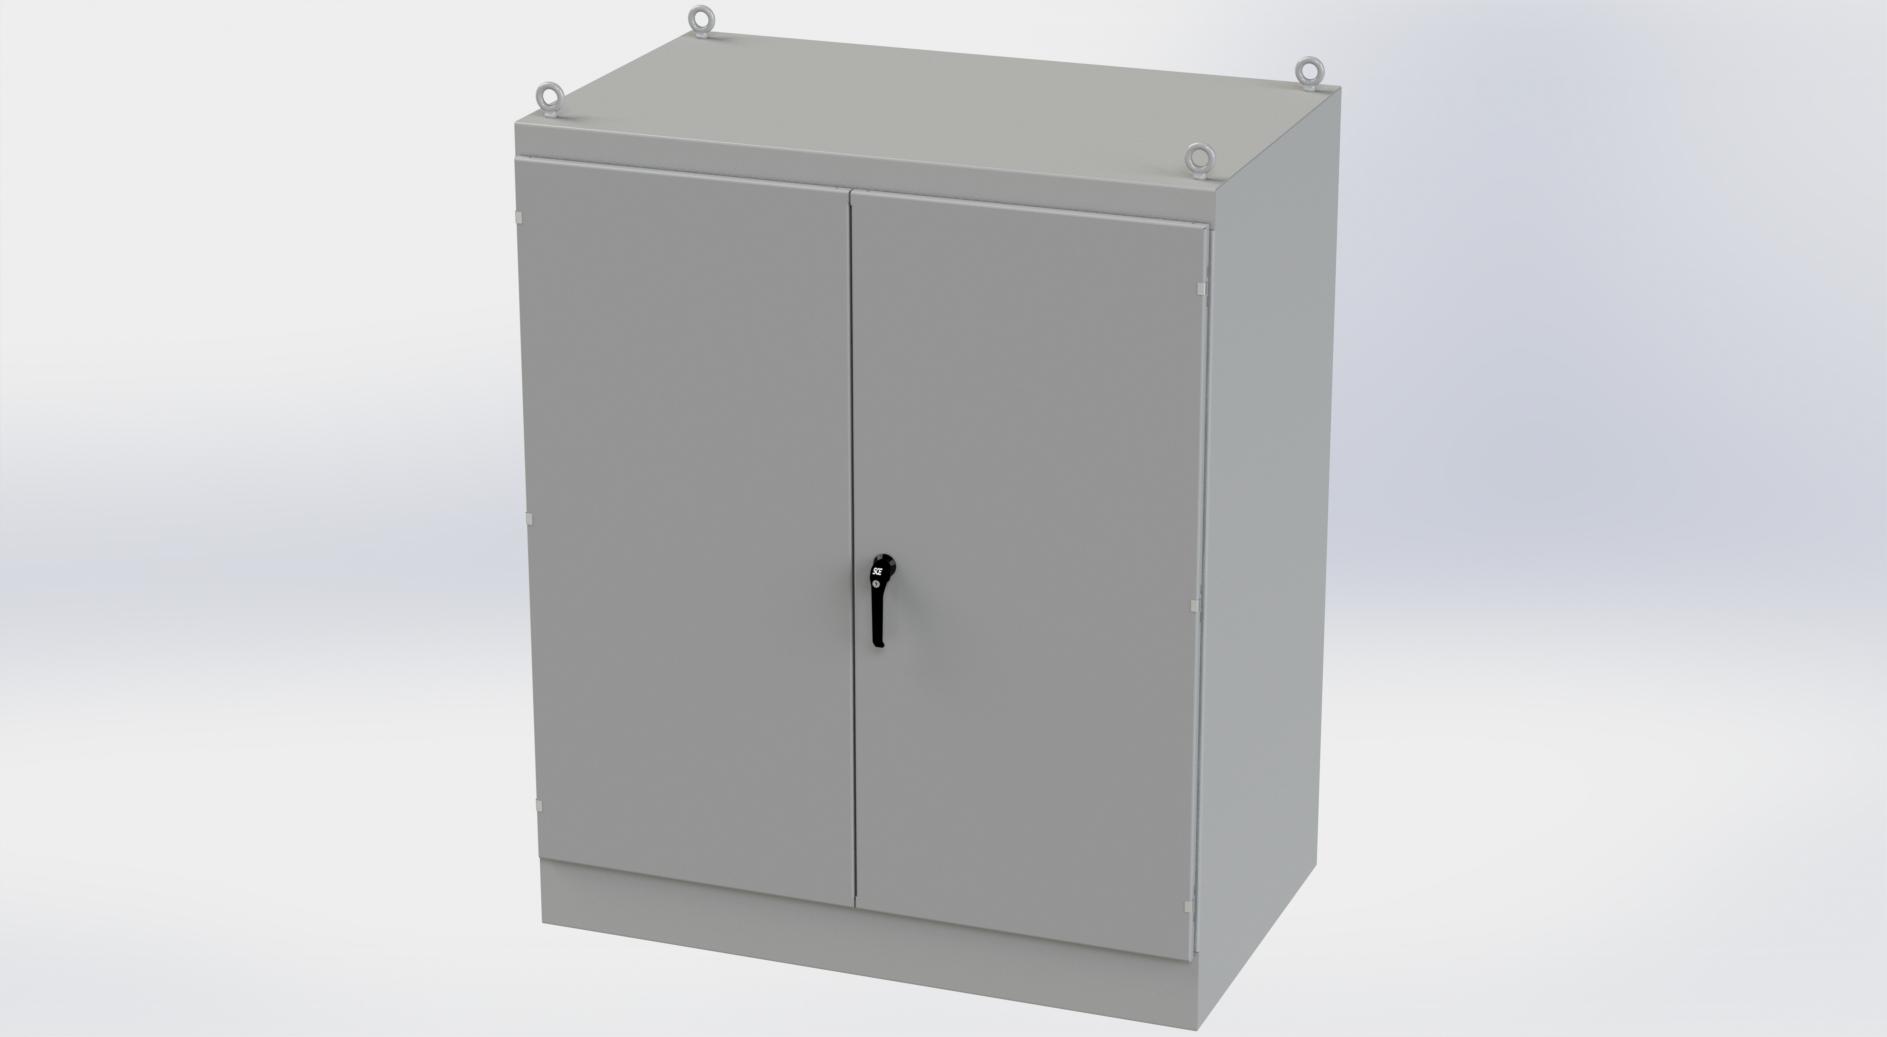 Saginaw Control SCE-726036FSD FSD Enclosure, Height:72.00", Width:60.00", Depth:36.00", ANSI-61 gray finish inside and out. Optional sub-panels are powder coated white.